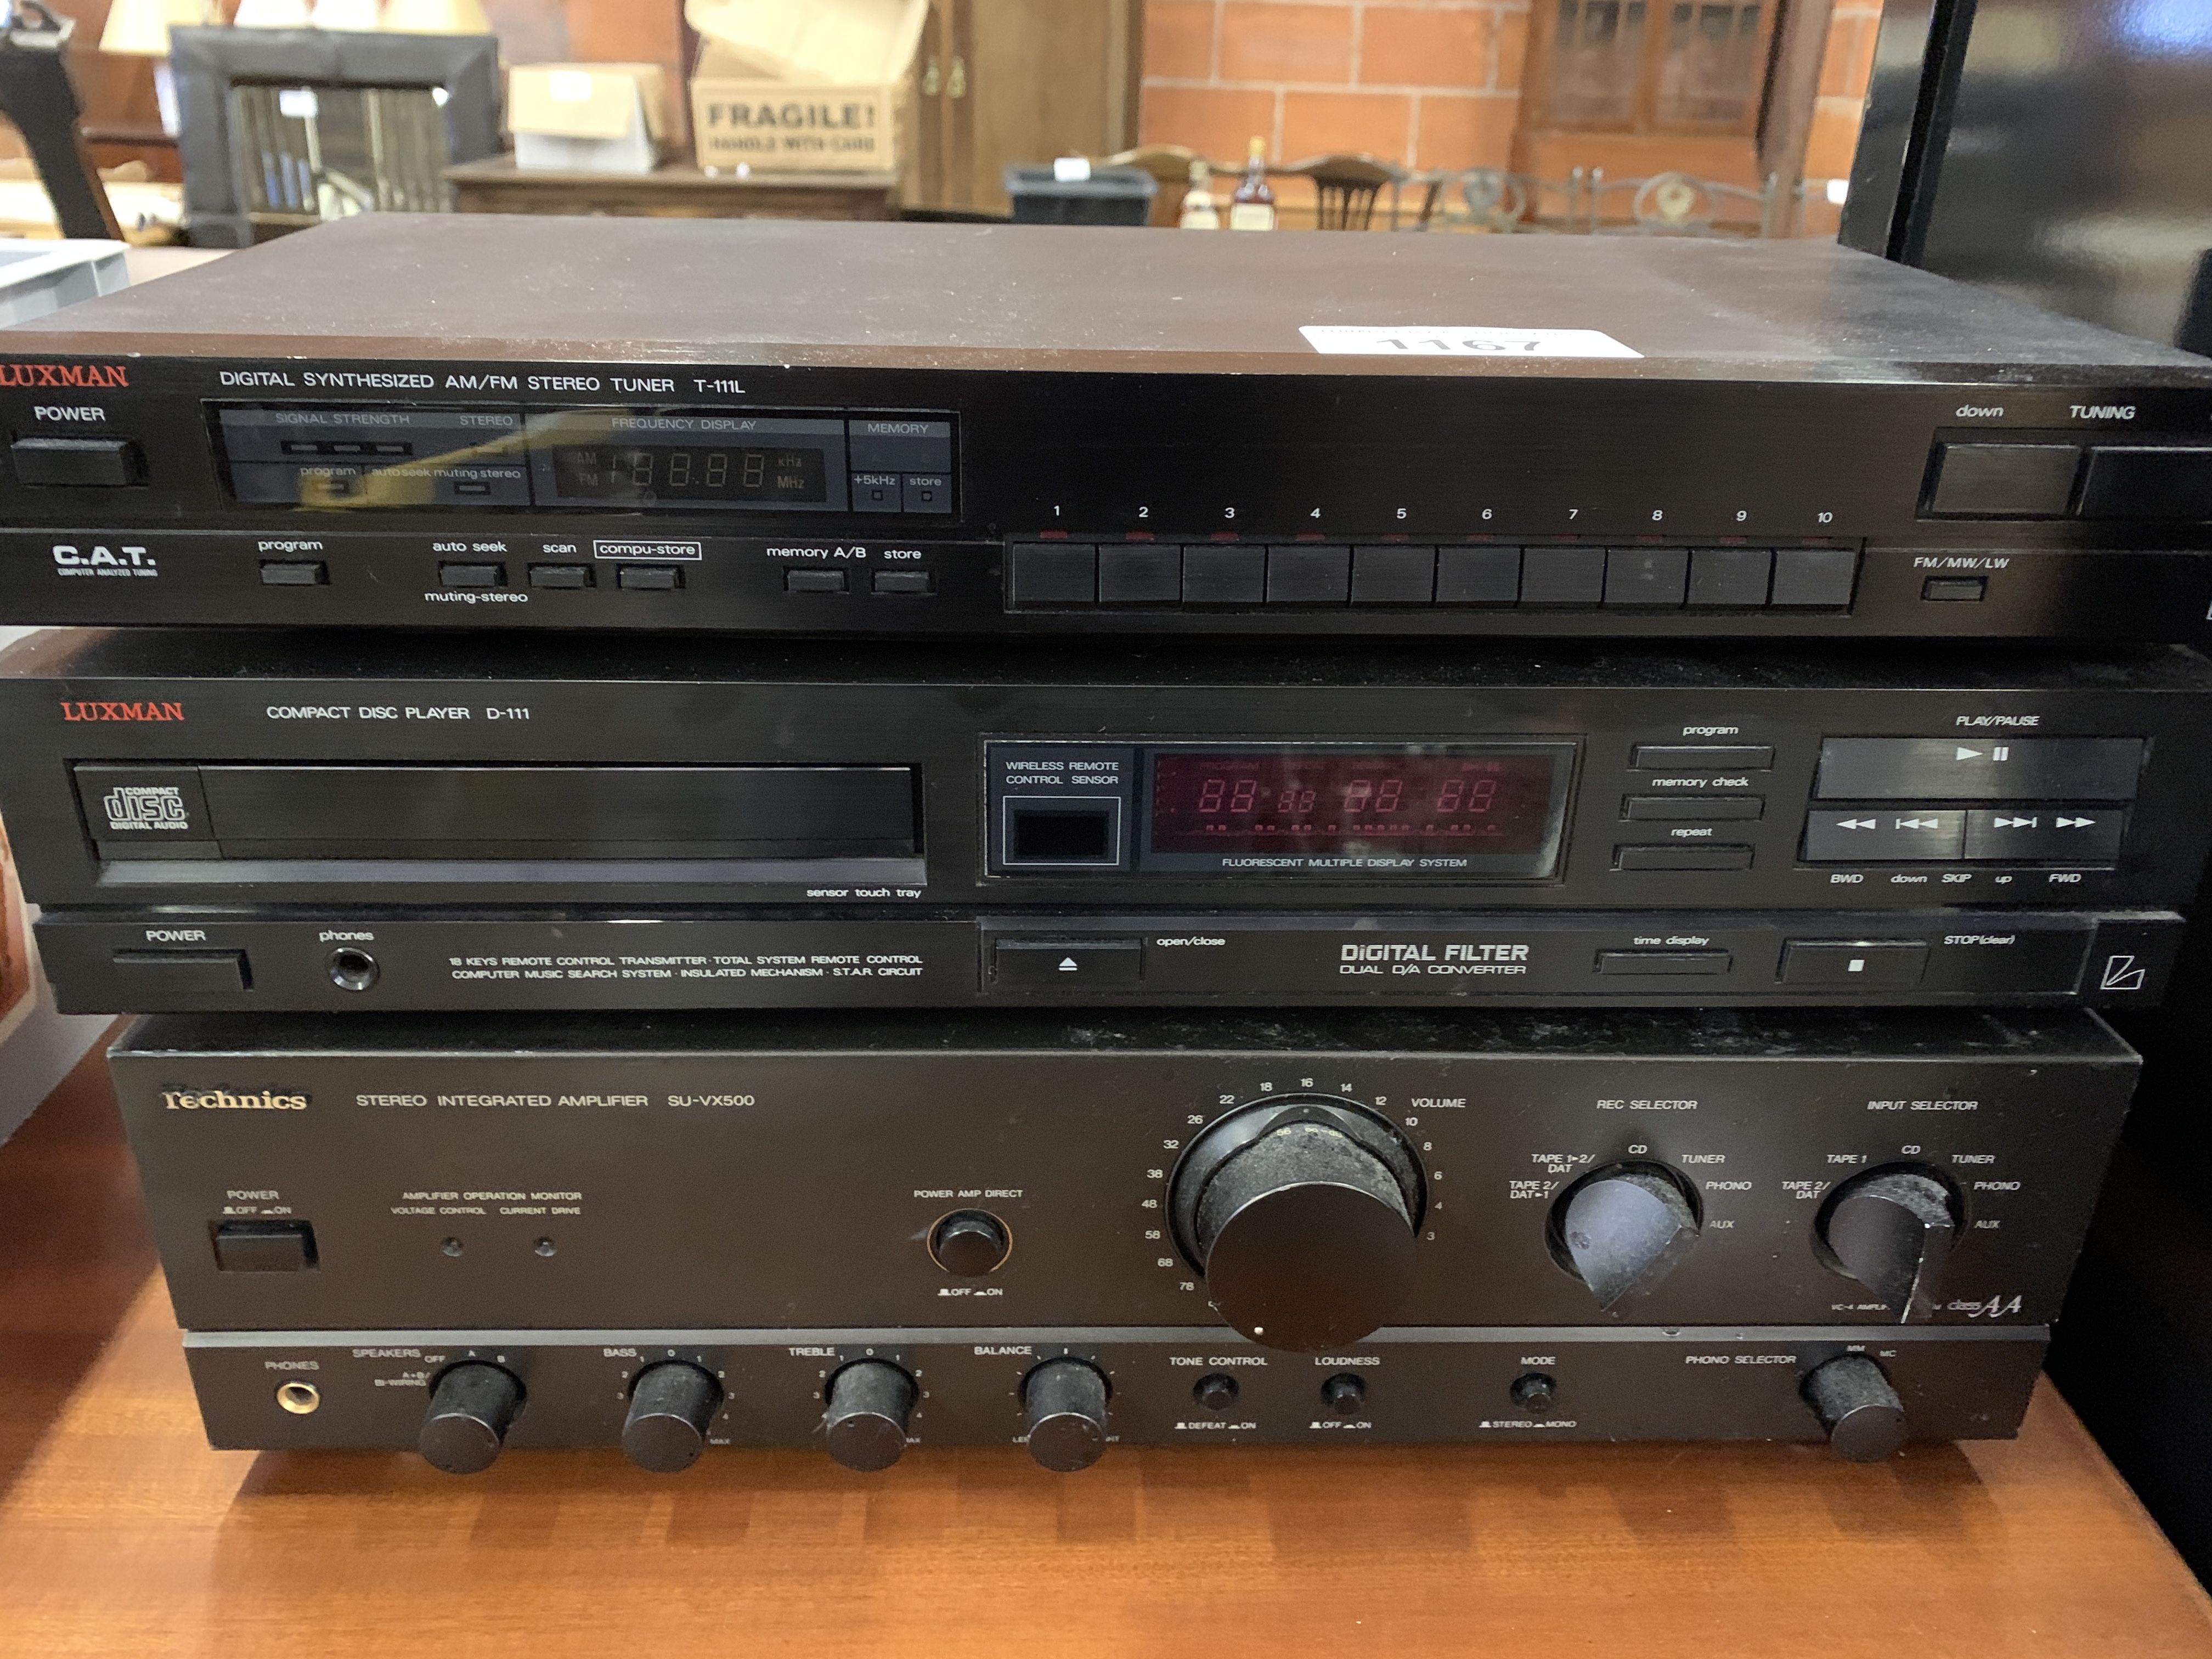 Technics amplifier; Luxman compact disc player, and AM/FM tuner. - Image 2 of 2